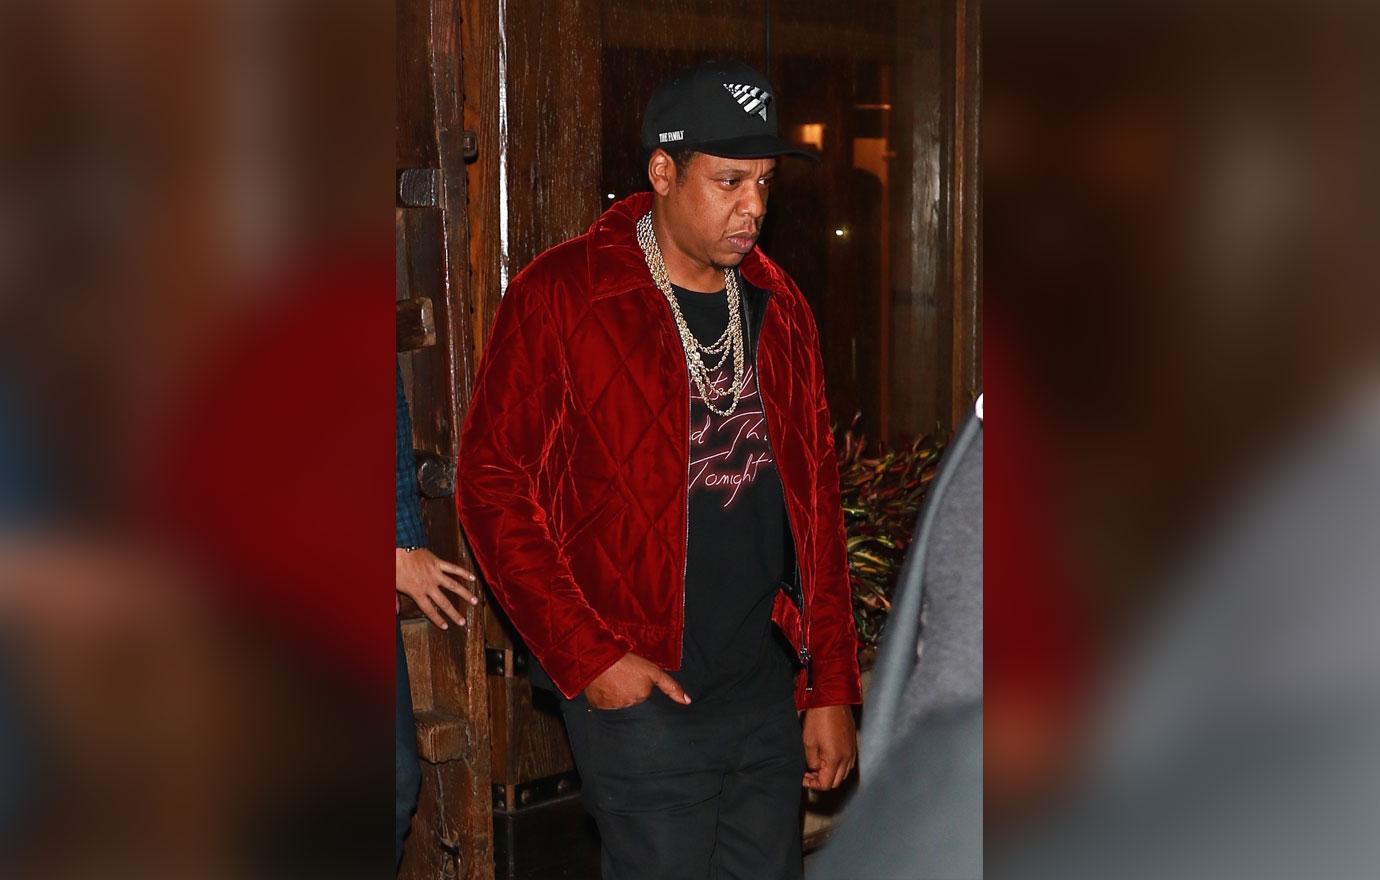 Jay-Z Drops $91,000 on Ace of Spades at New York City Club - XXL